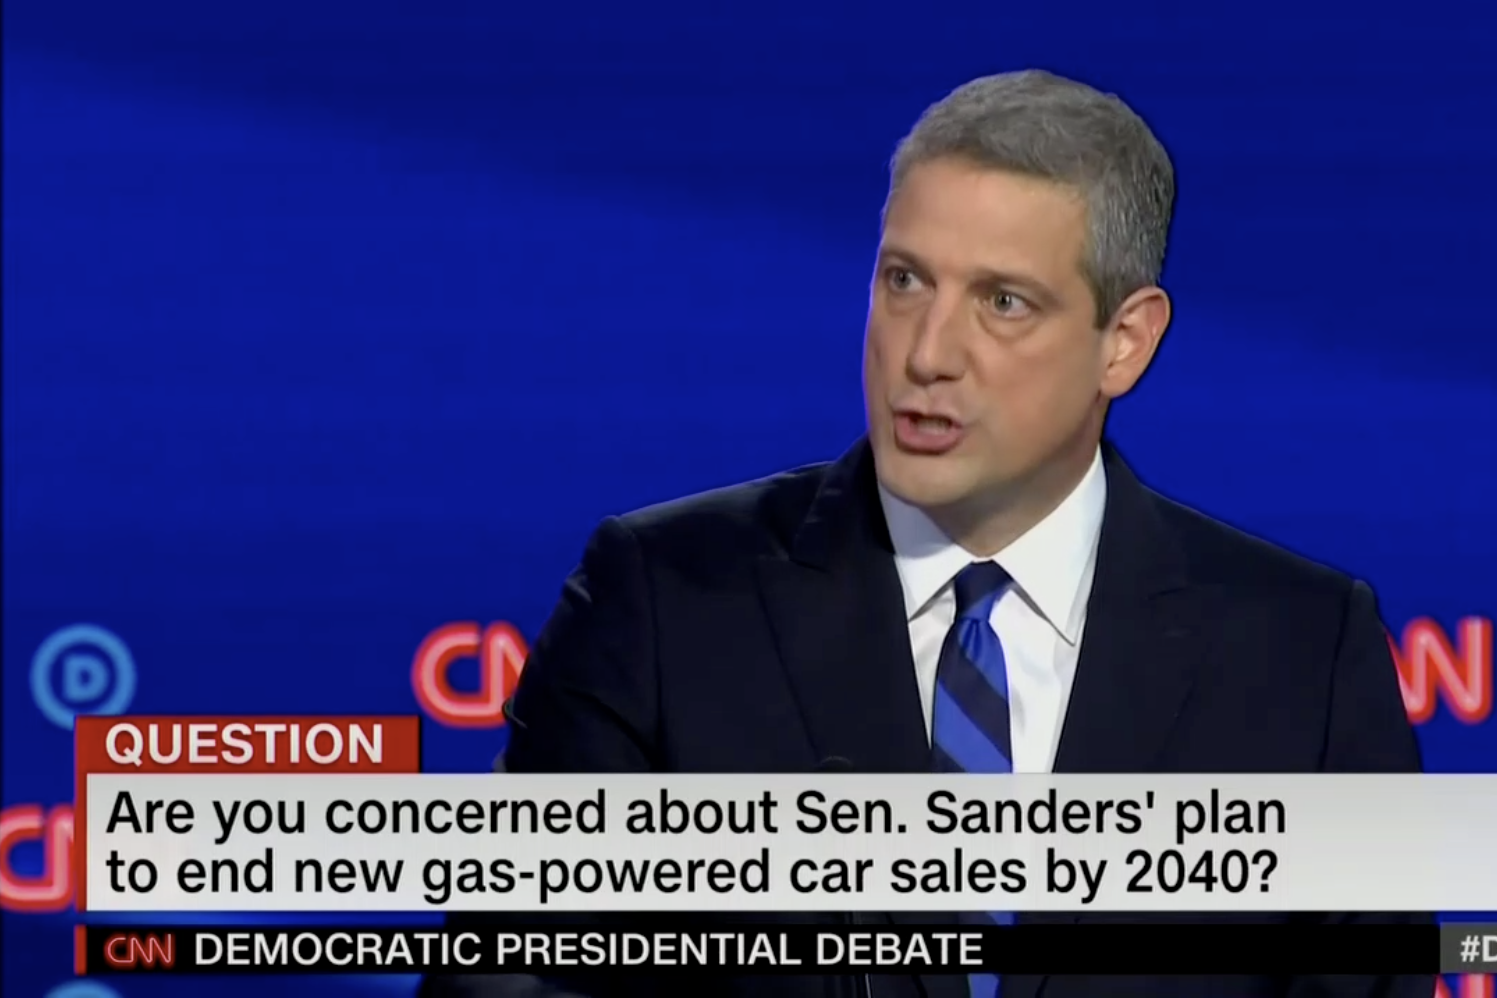 In this screengrab from CNN, the banner reads: "Are you concerned about Sen. Sanders' plan to end new gas-powered car sales by 2040?"